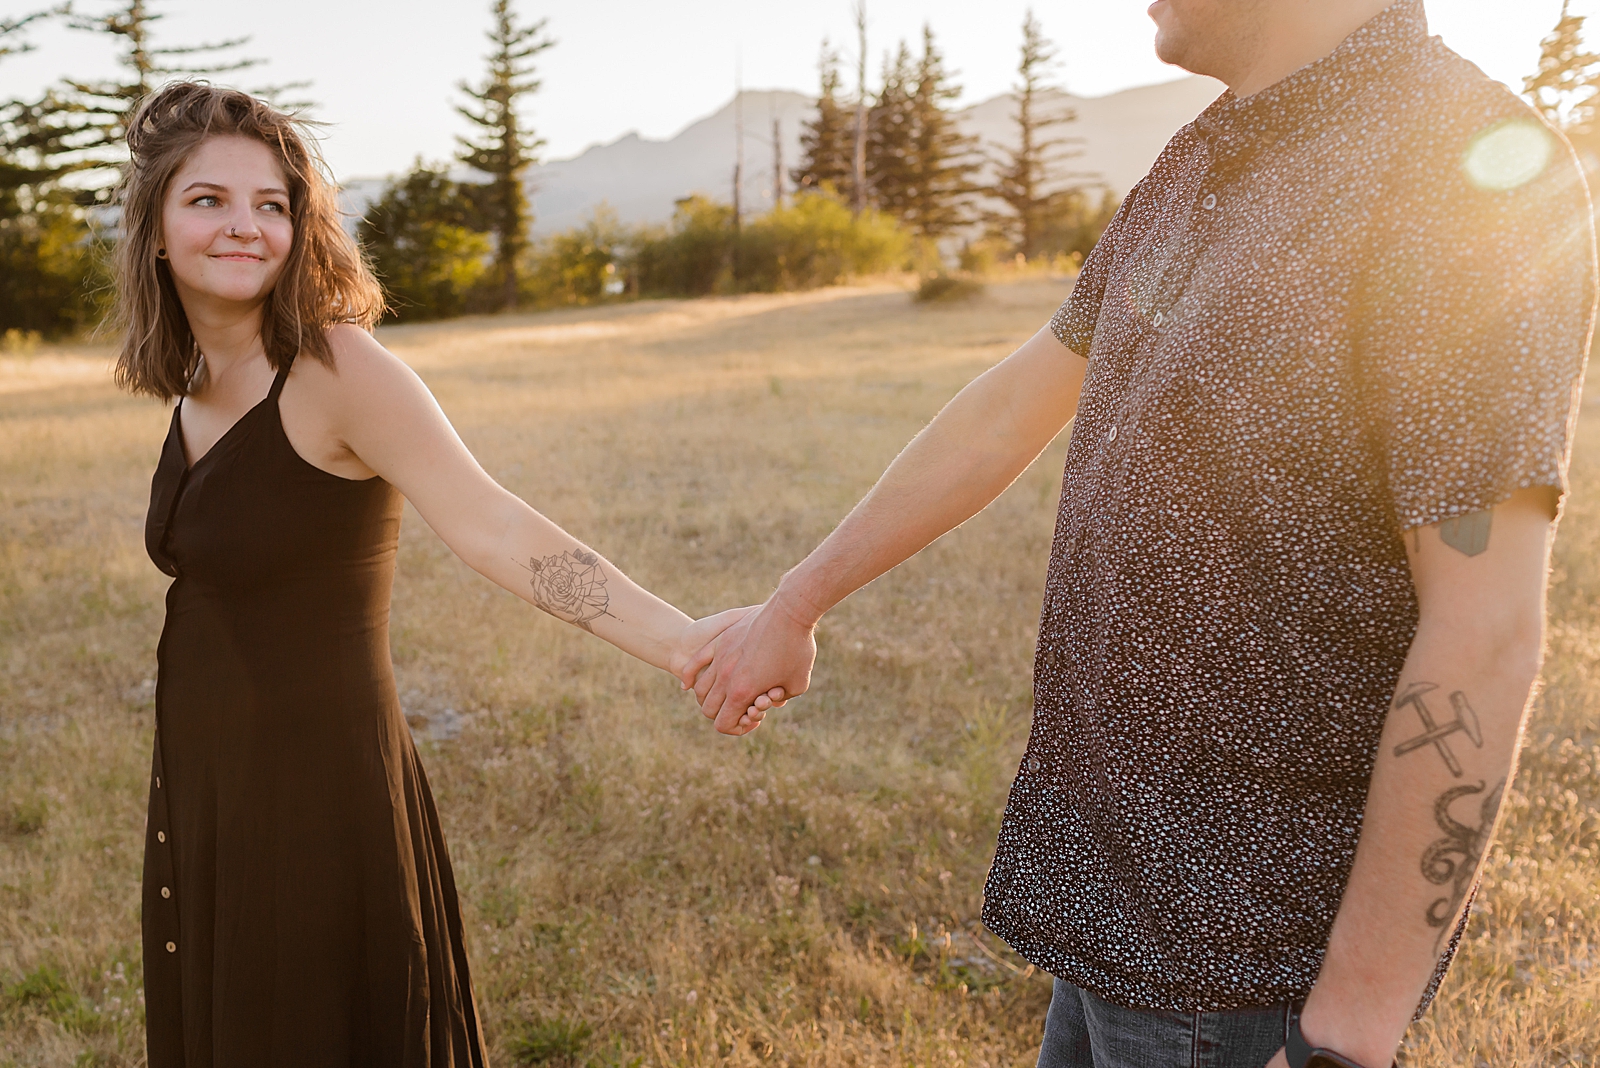 Couple holding hands and looking at each other on grassy field with the sun setting